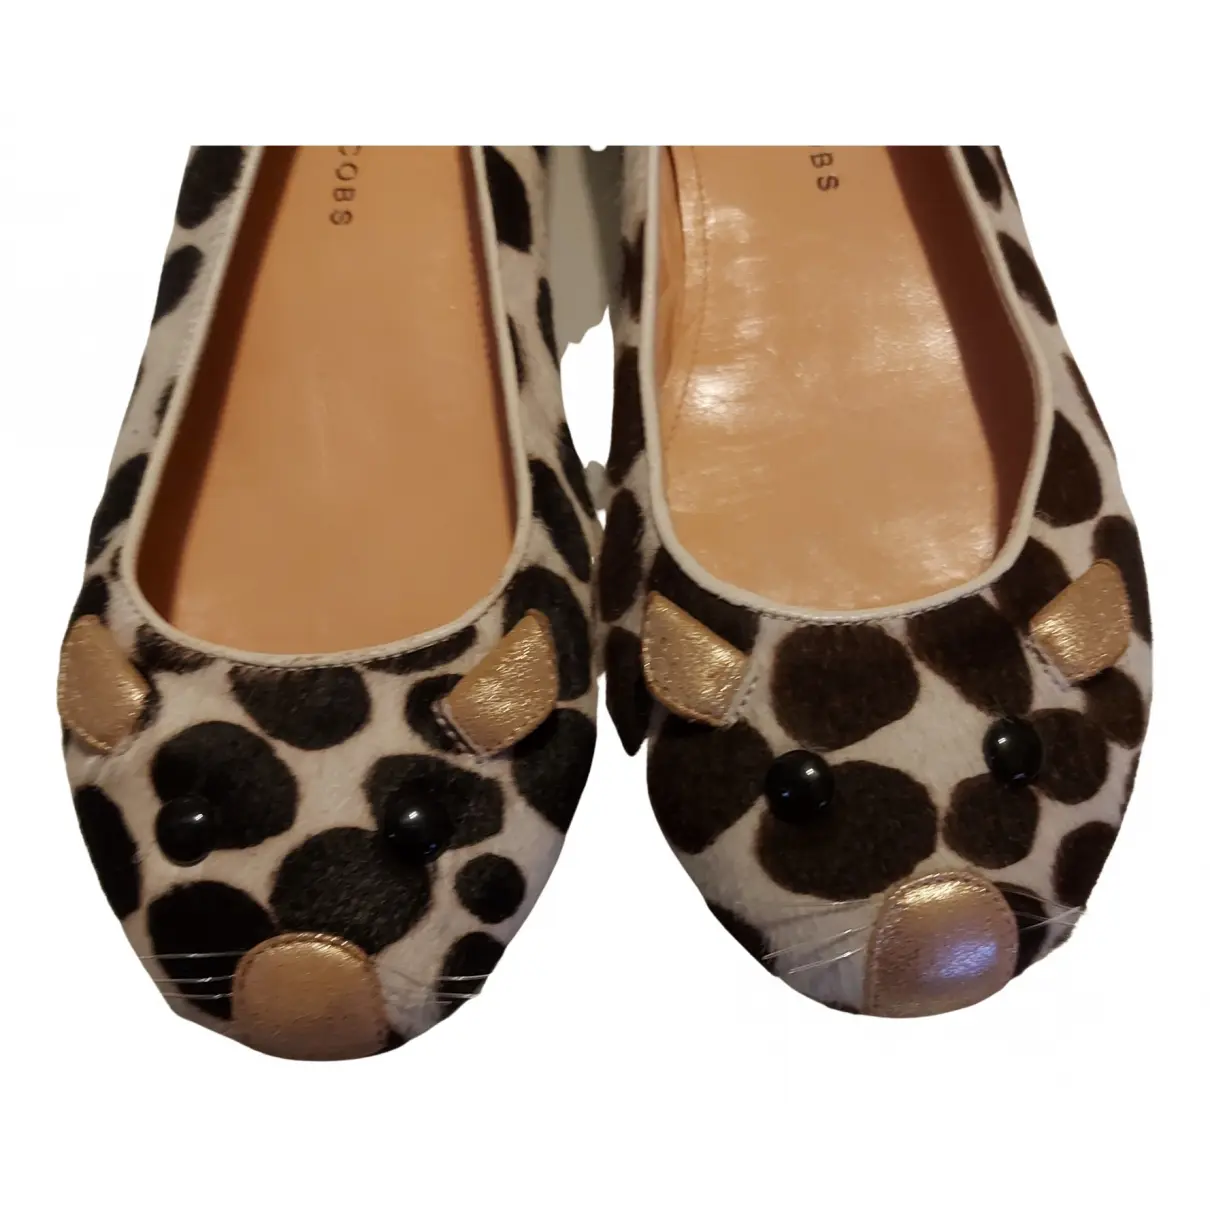 Buy Marc by Marc Jacobs Pony-style calfskin ballet flats online